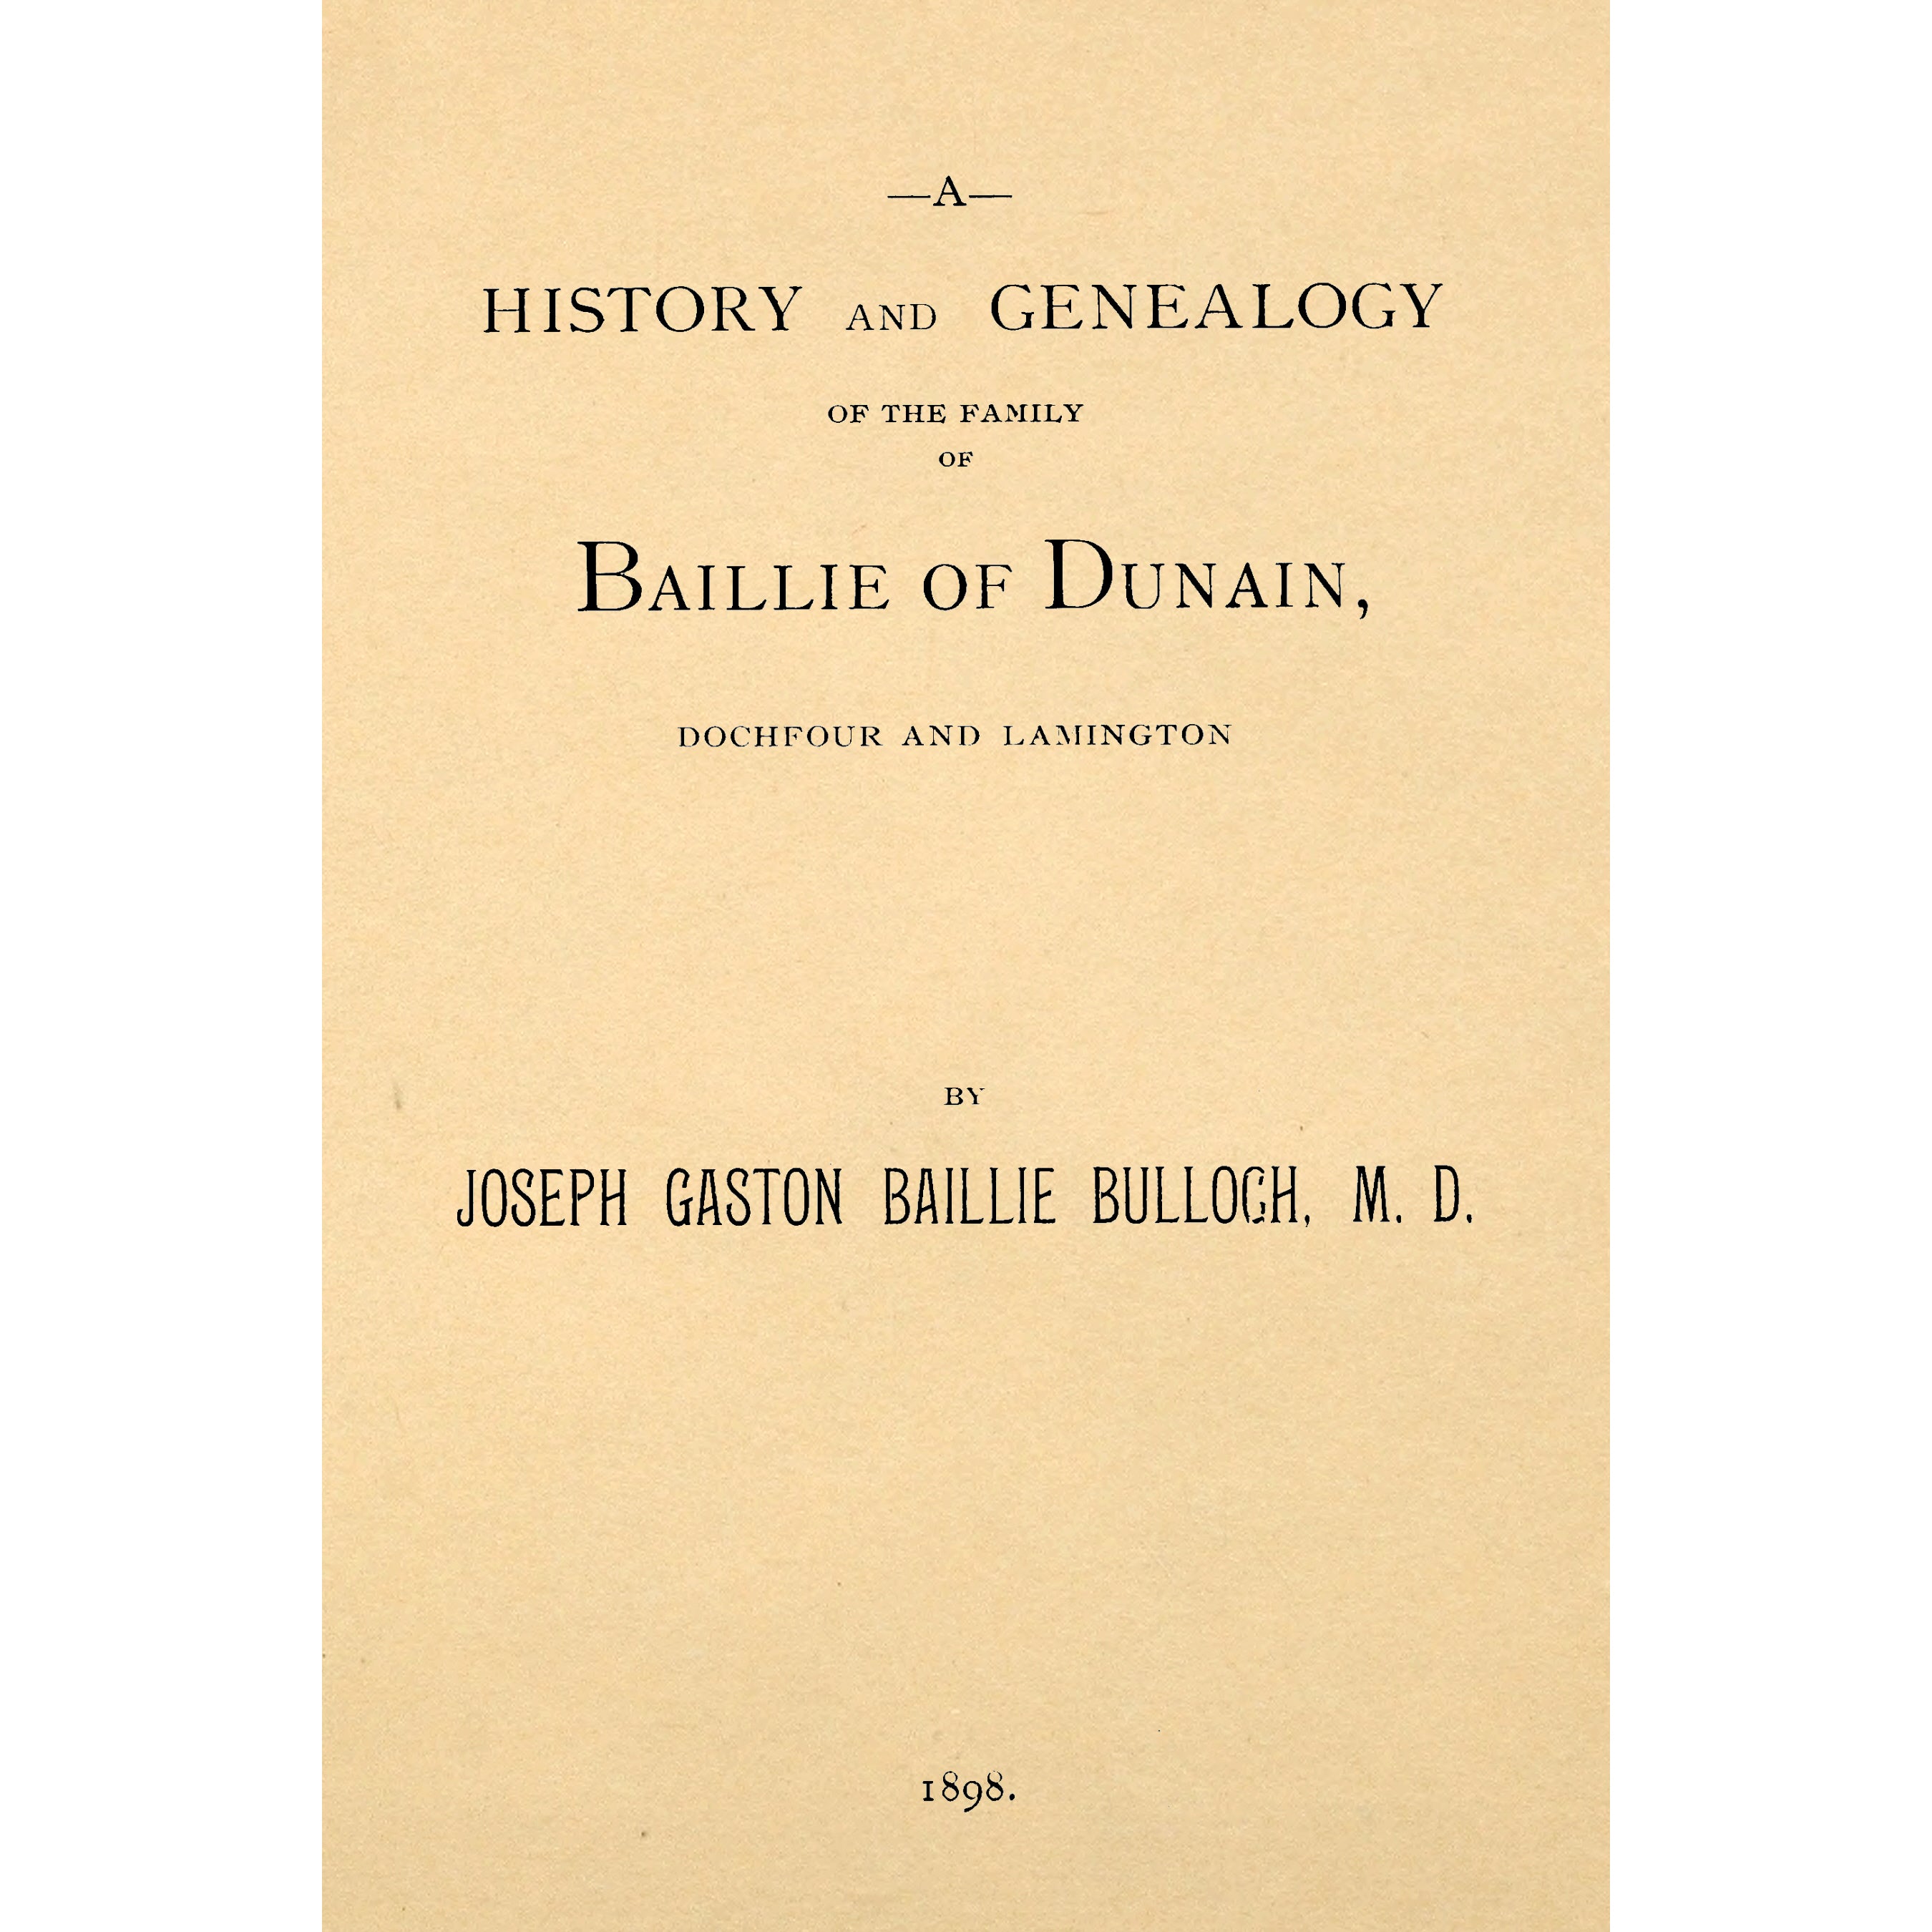 A History and Genealogy of the Family of Ballie of Dunain